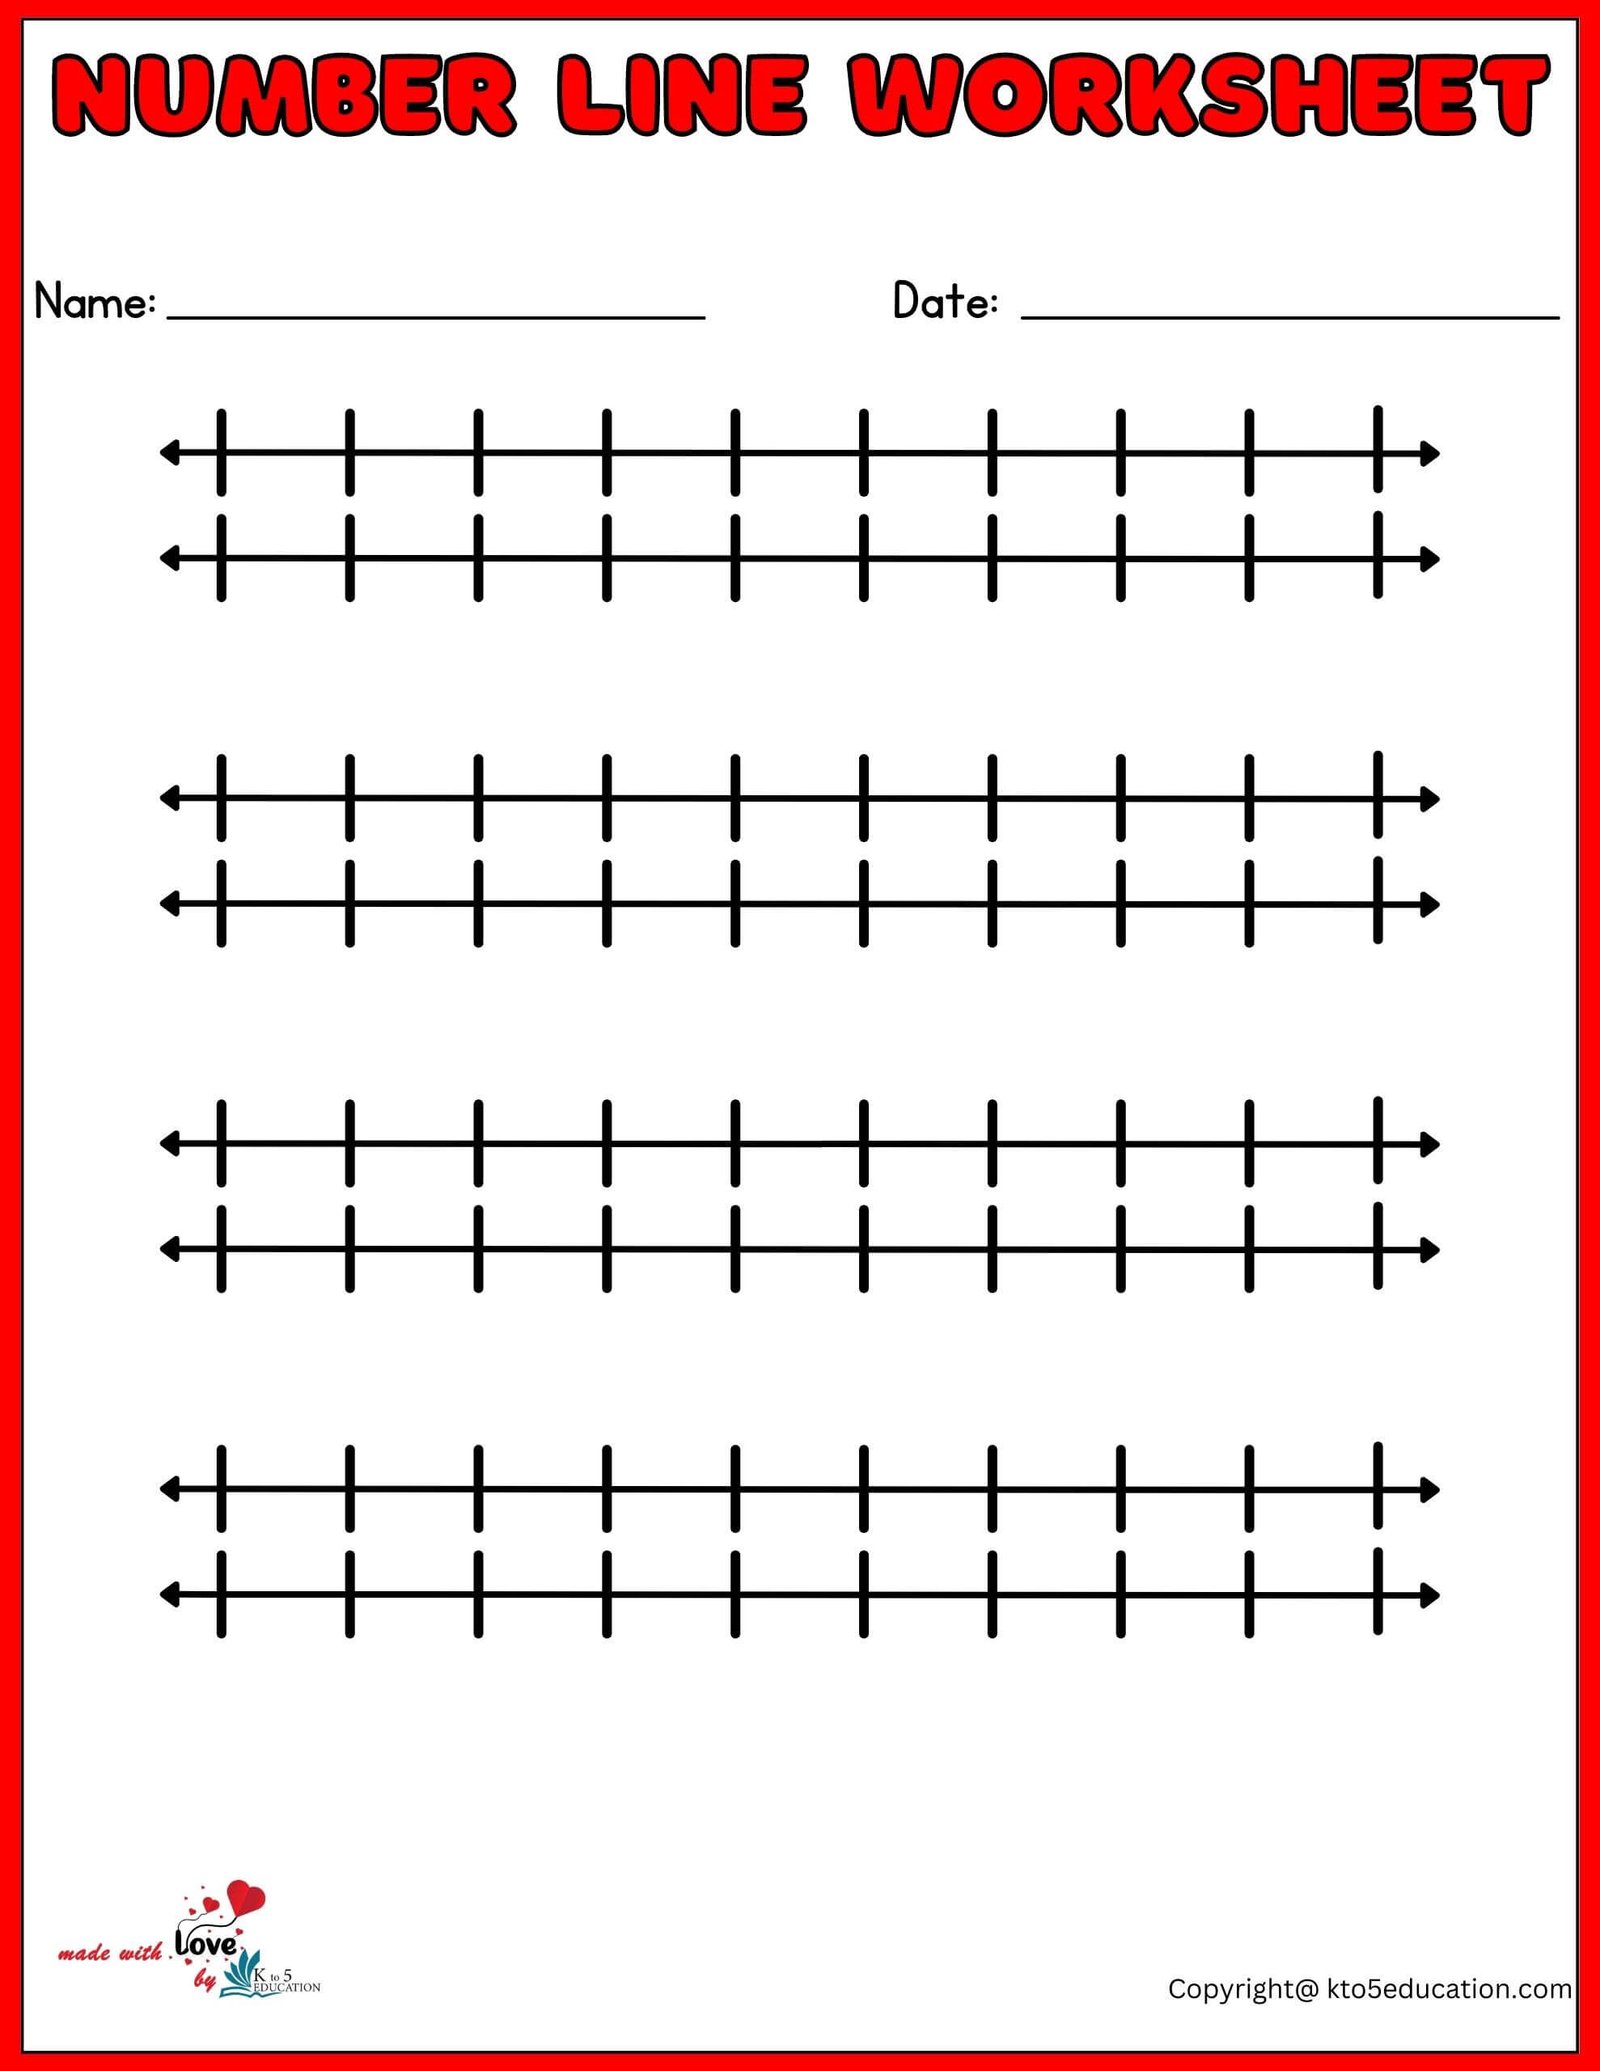 Double Number Line Worksheet For First Grade 1-10